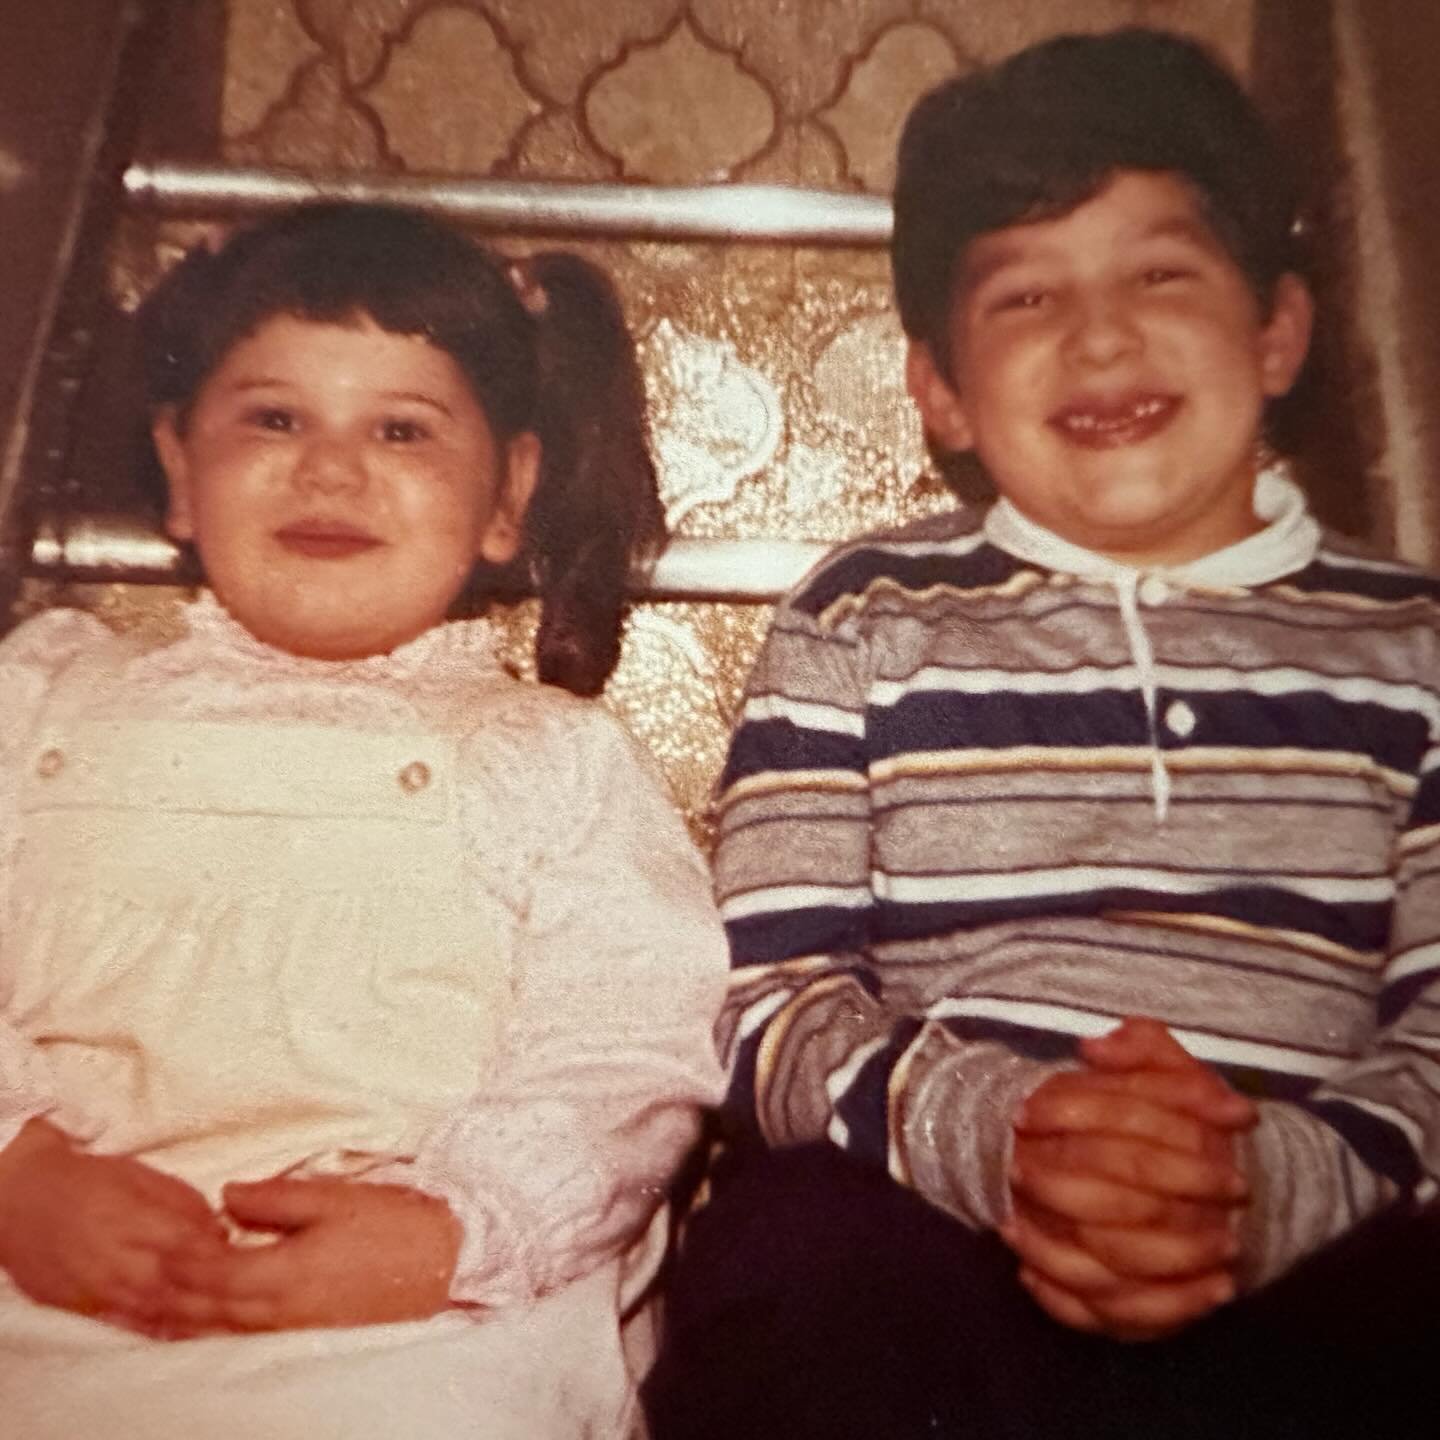 This guy turns 47 today. Happy Birthday to my brother Louie! He now has front teeth and I now have a neck. Pays to age. Love you, Lou-Lou. Kid photos are the best. #happybirthday